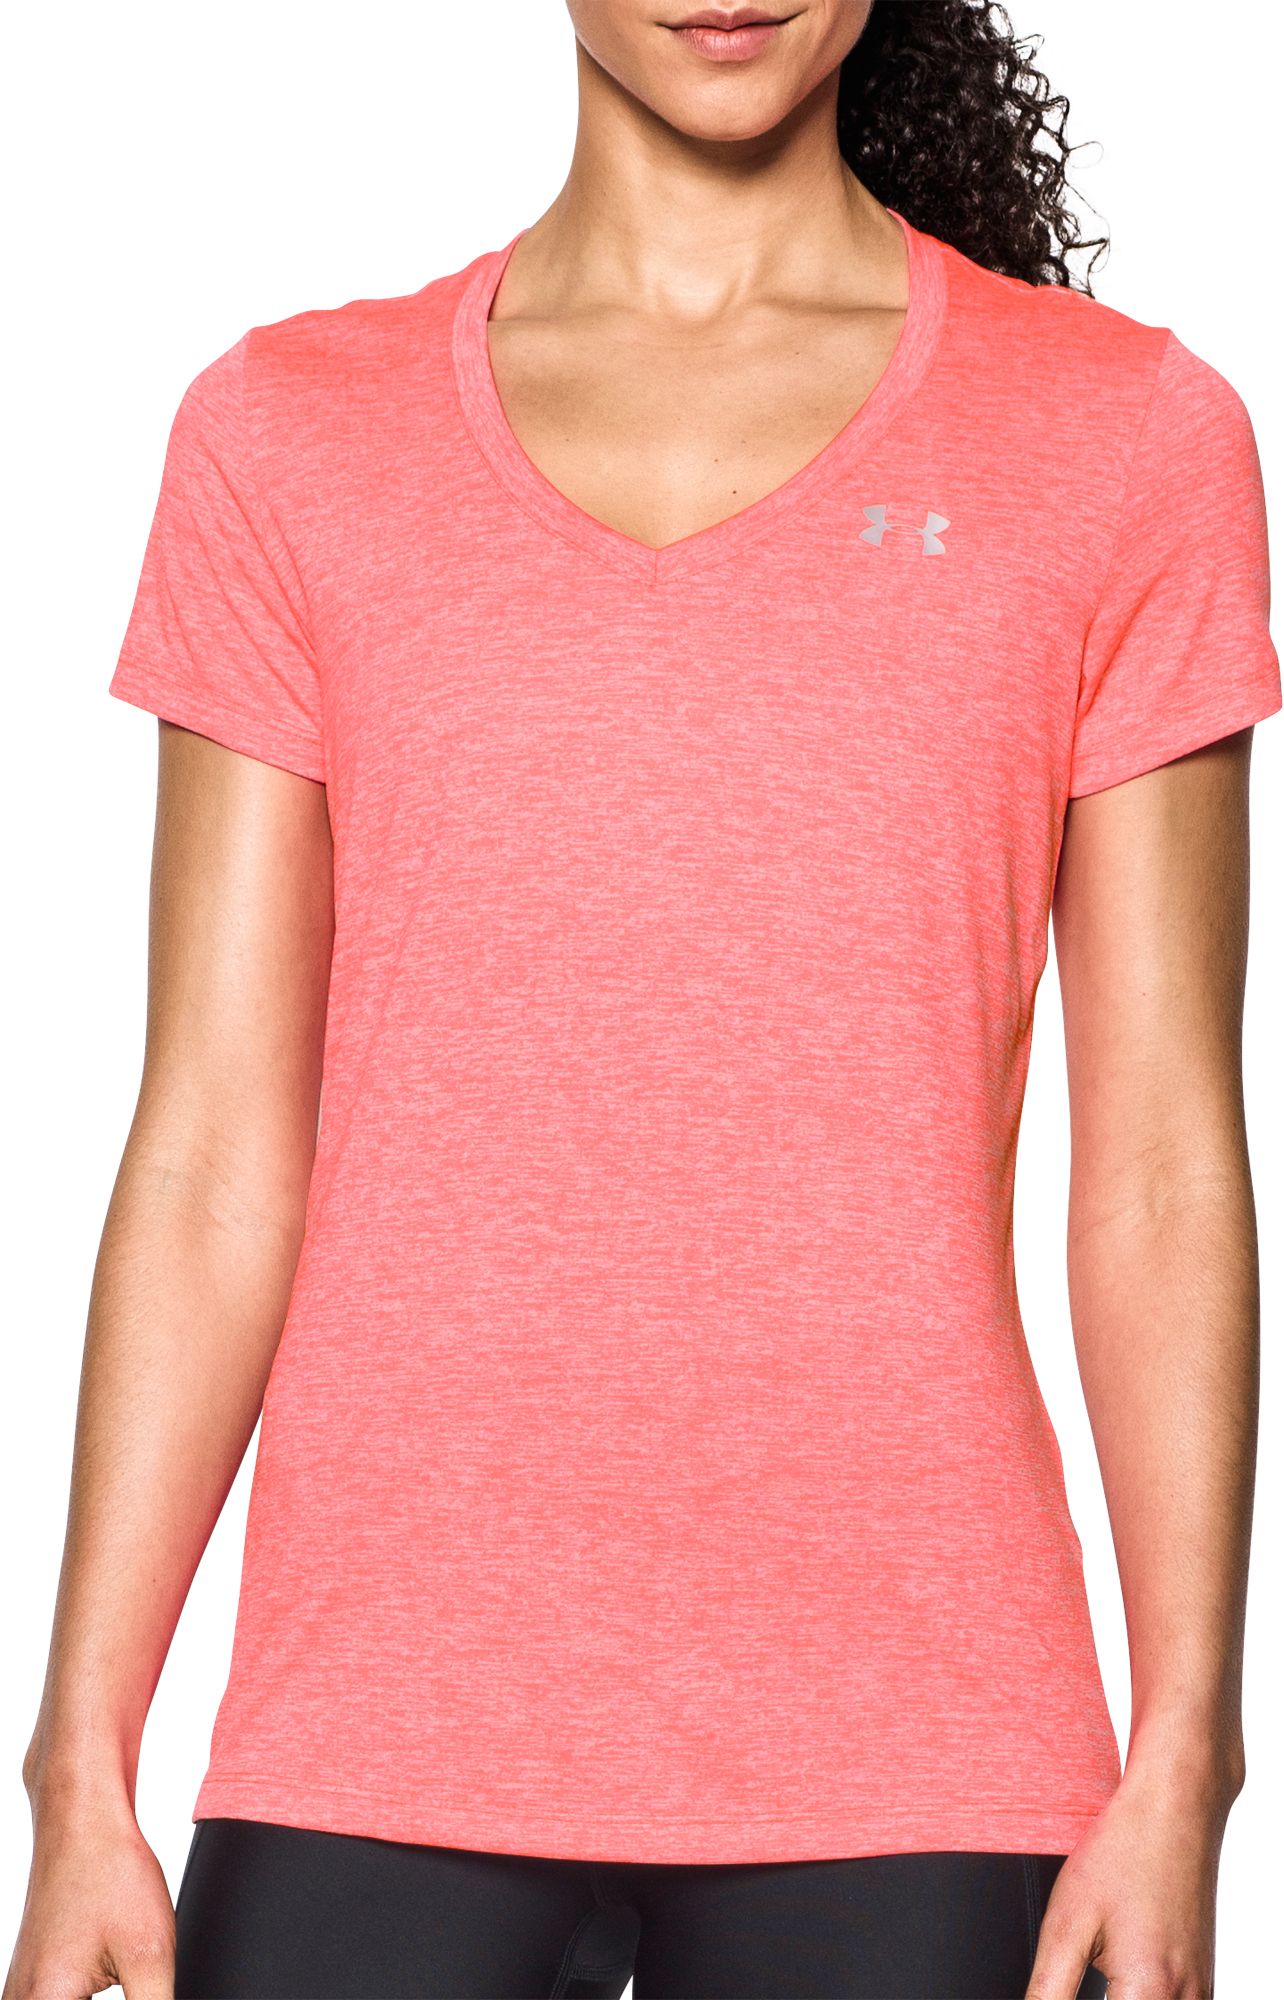 Under Armour Women's Twisted Tech V-Neck Shirt | DICK'S Sporting Goods